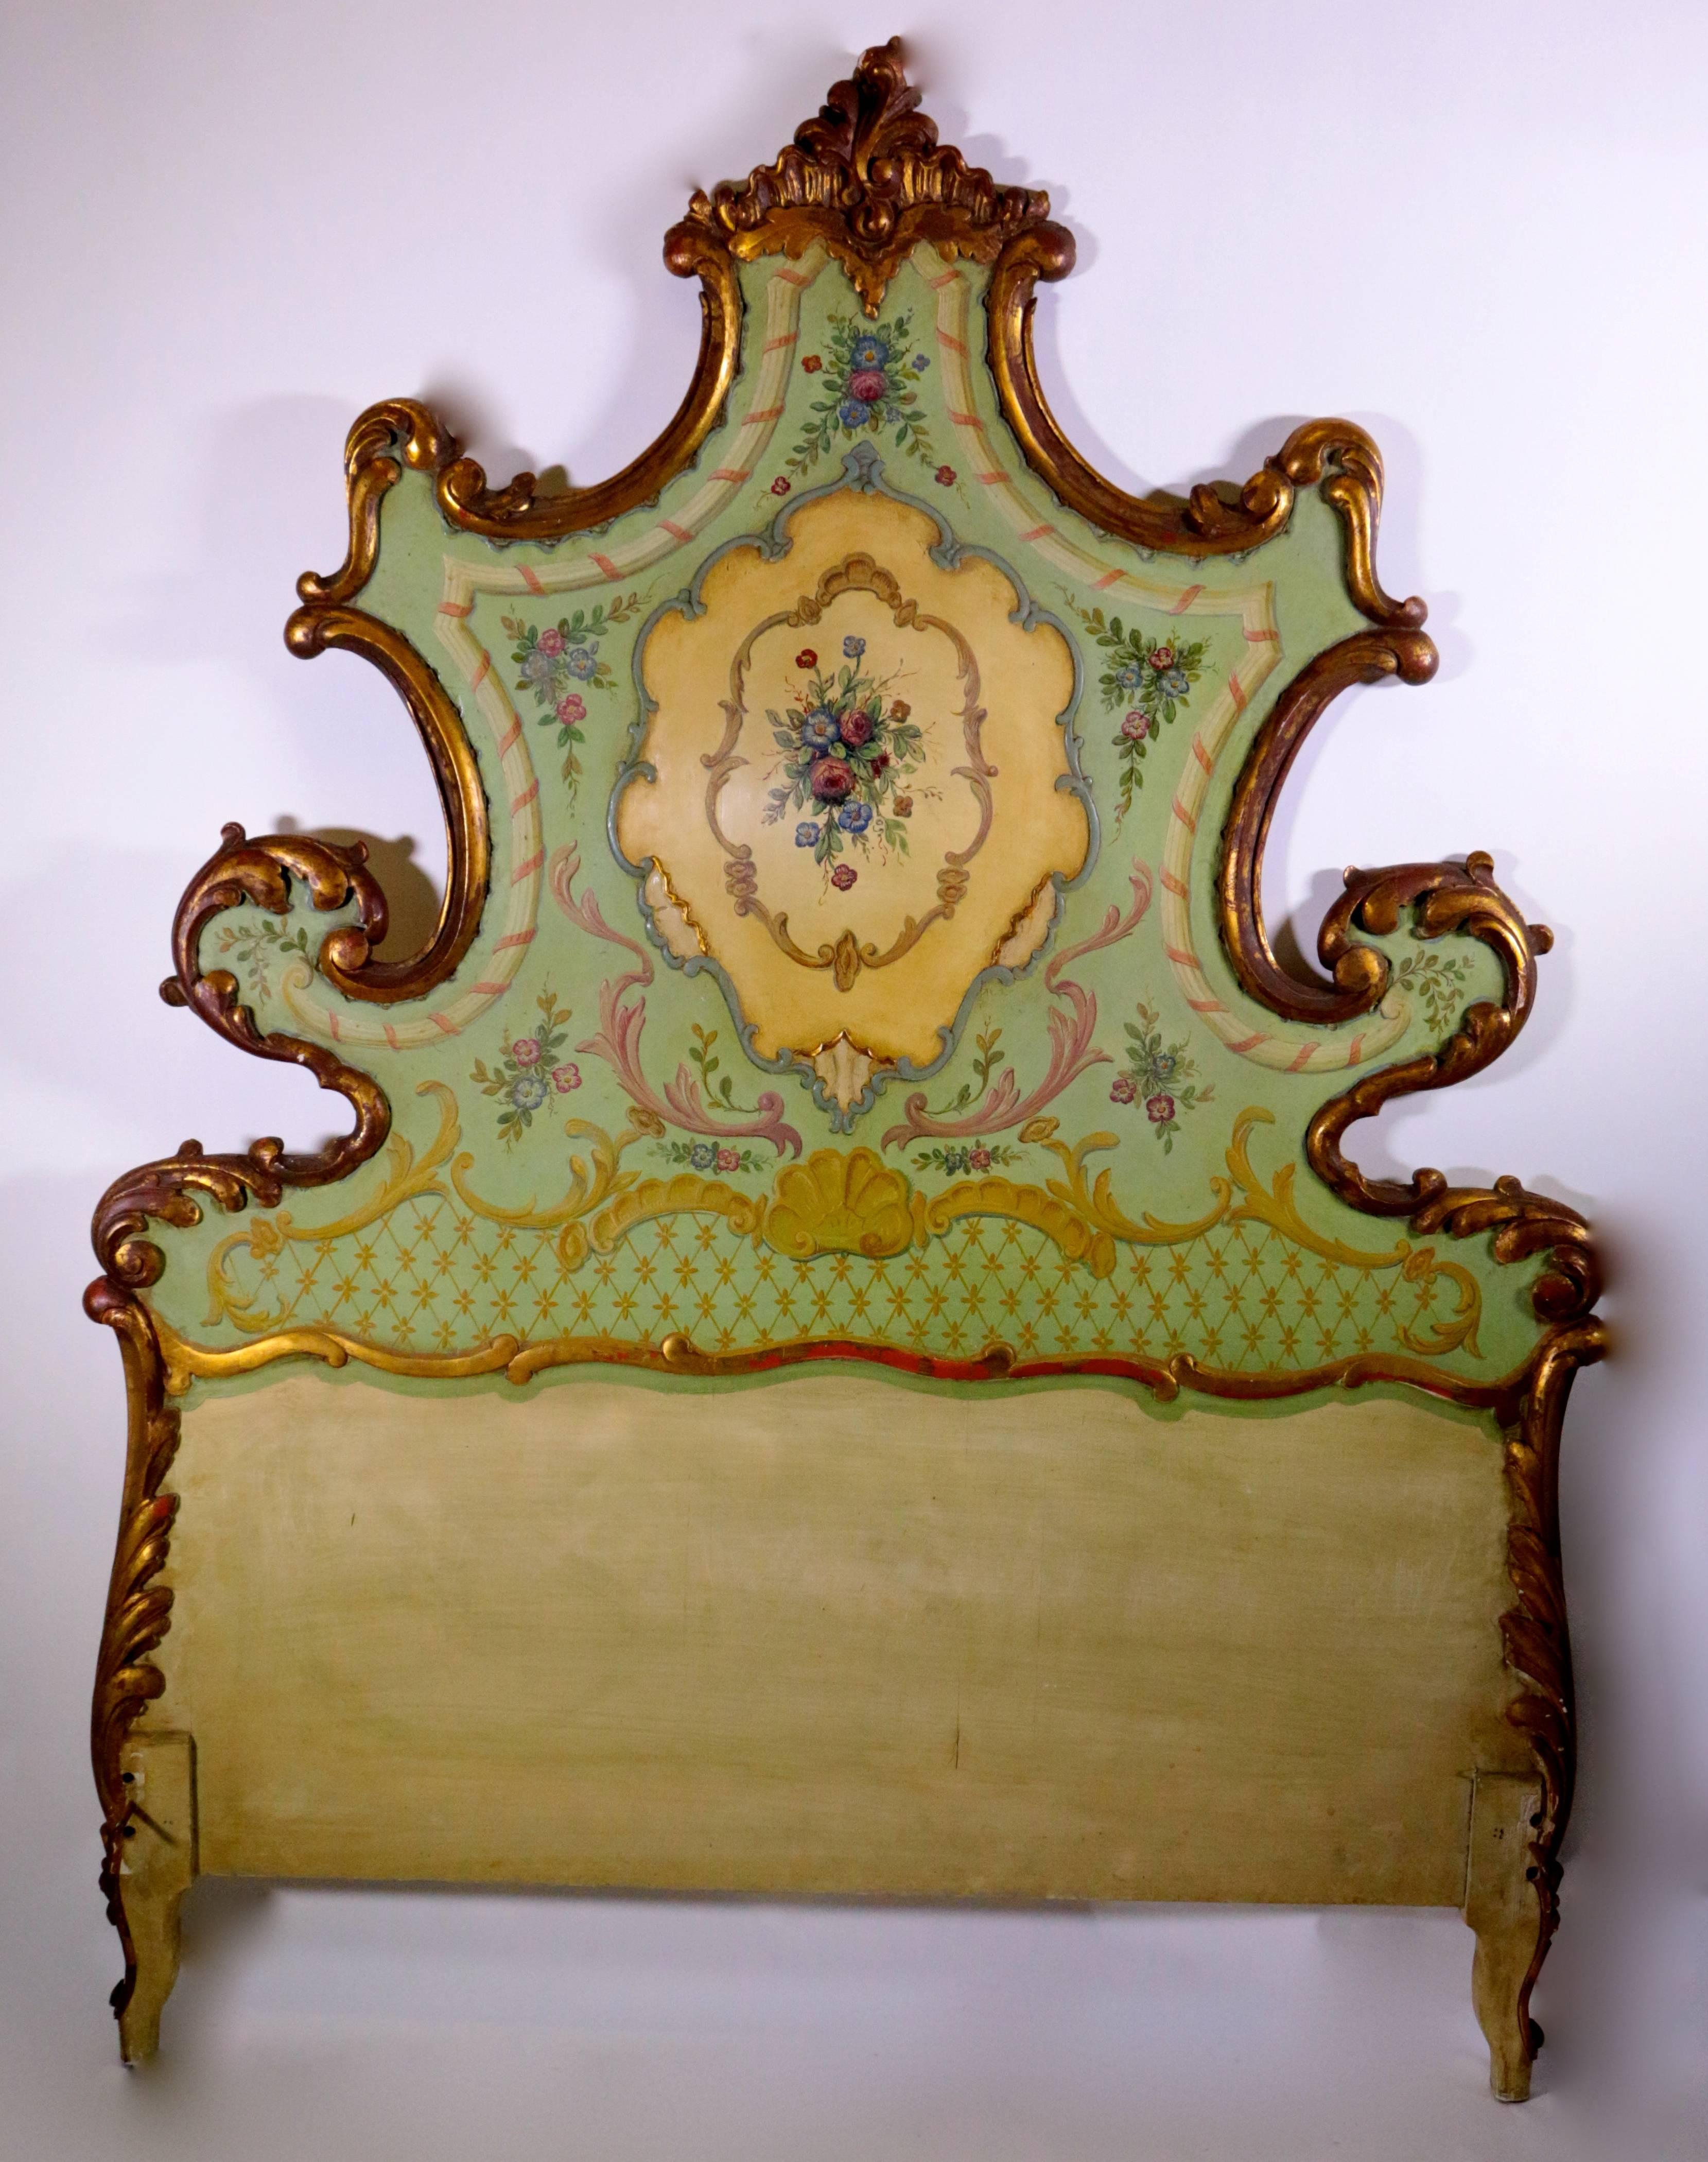 Fruitwood 19th Century Hand-Painted Venetian Bed